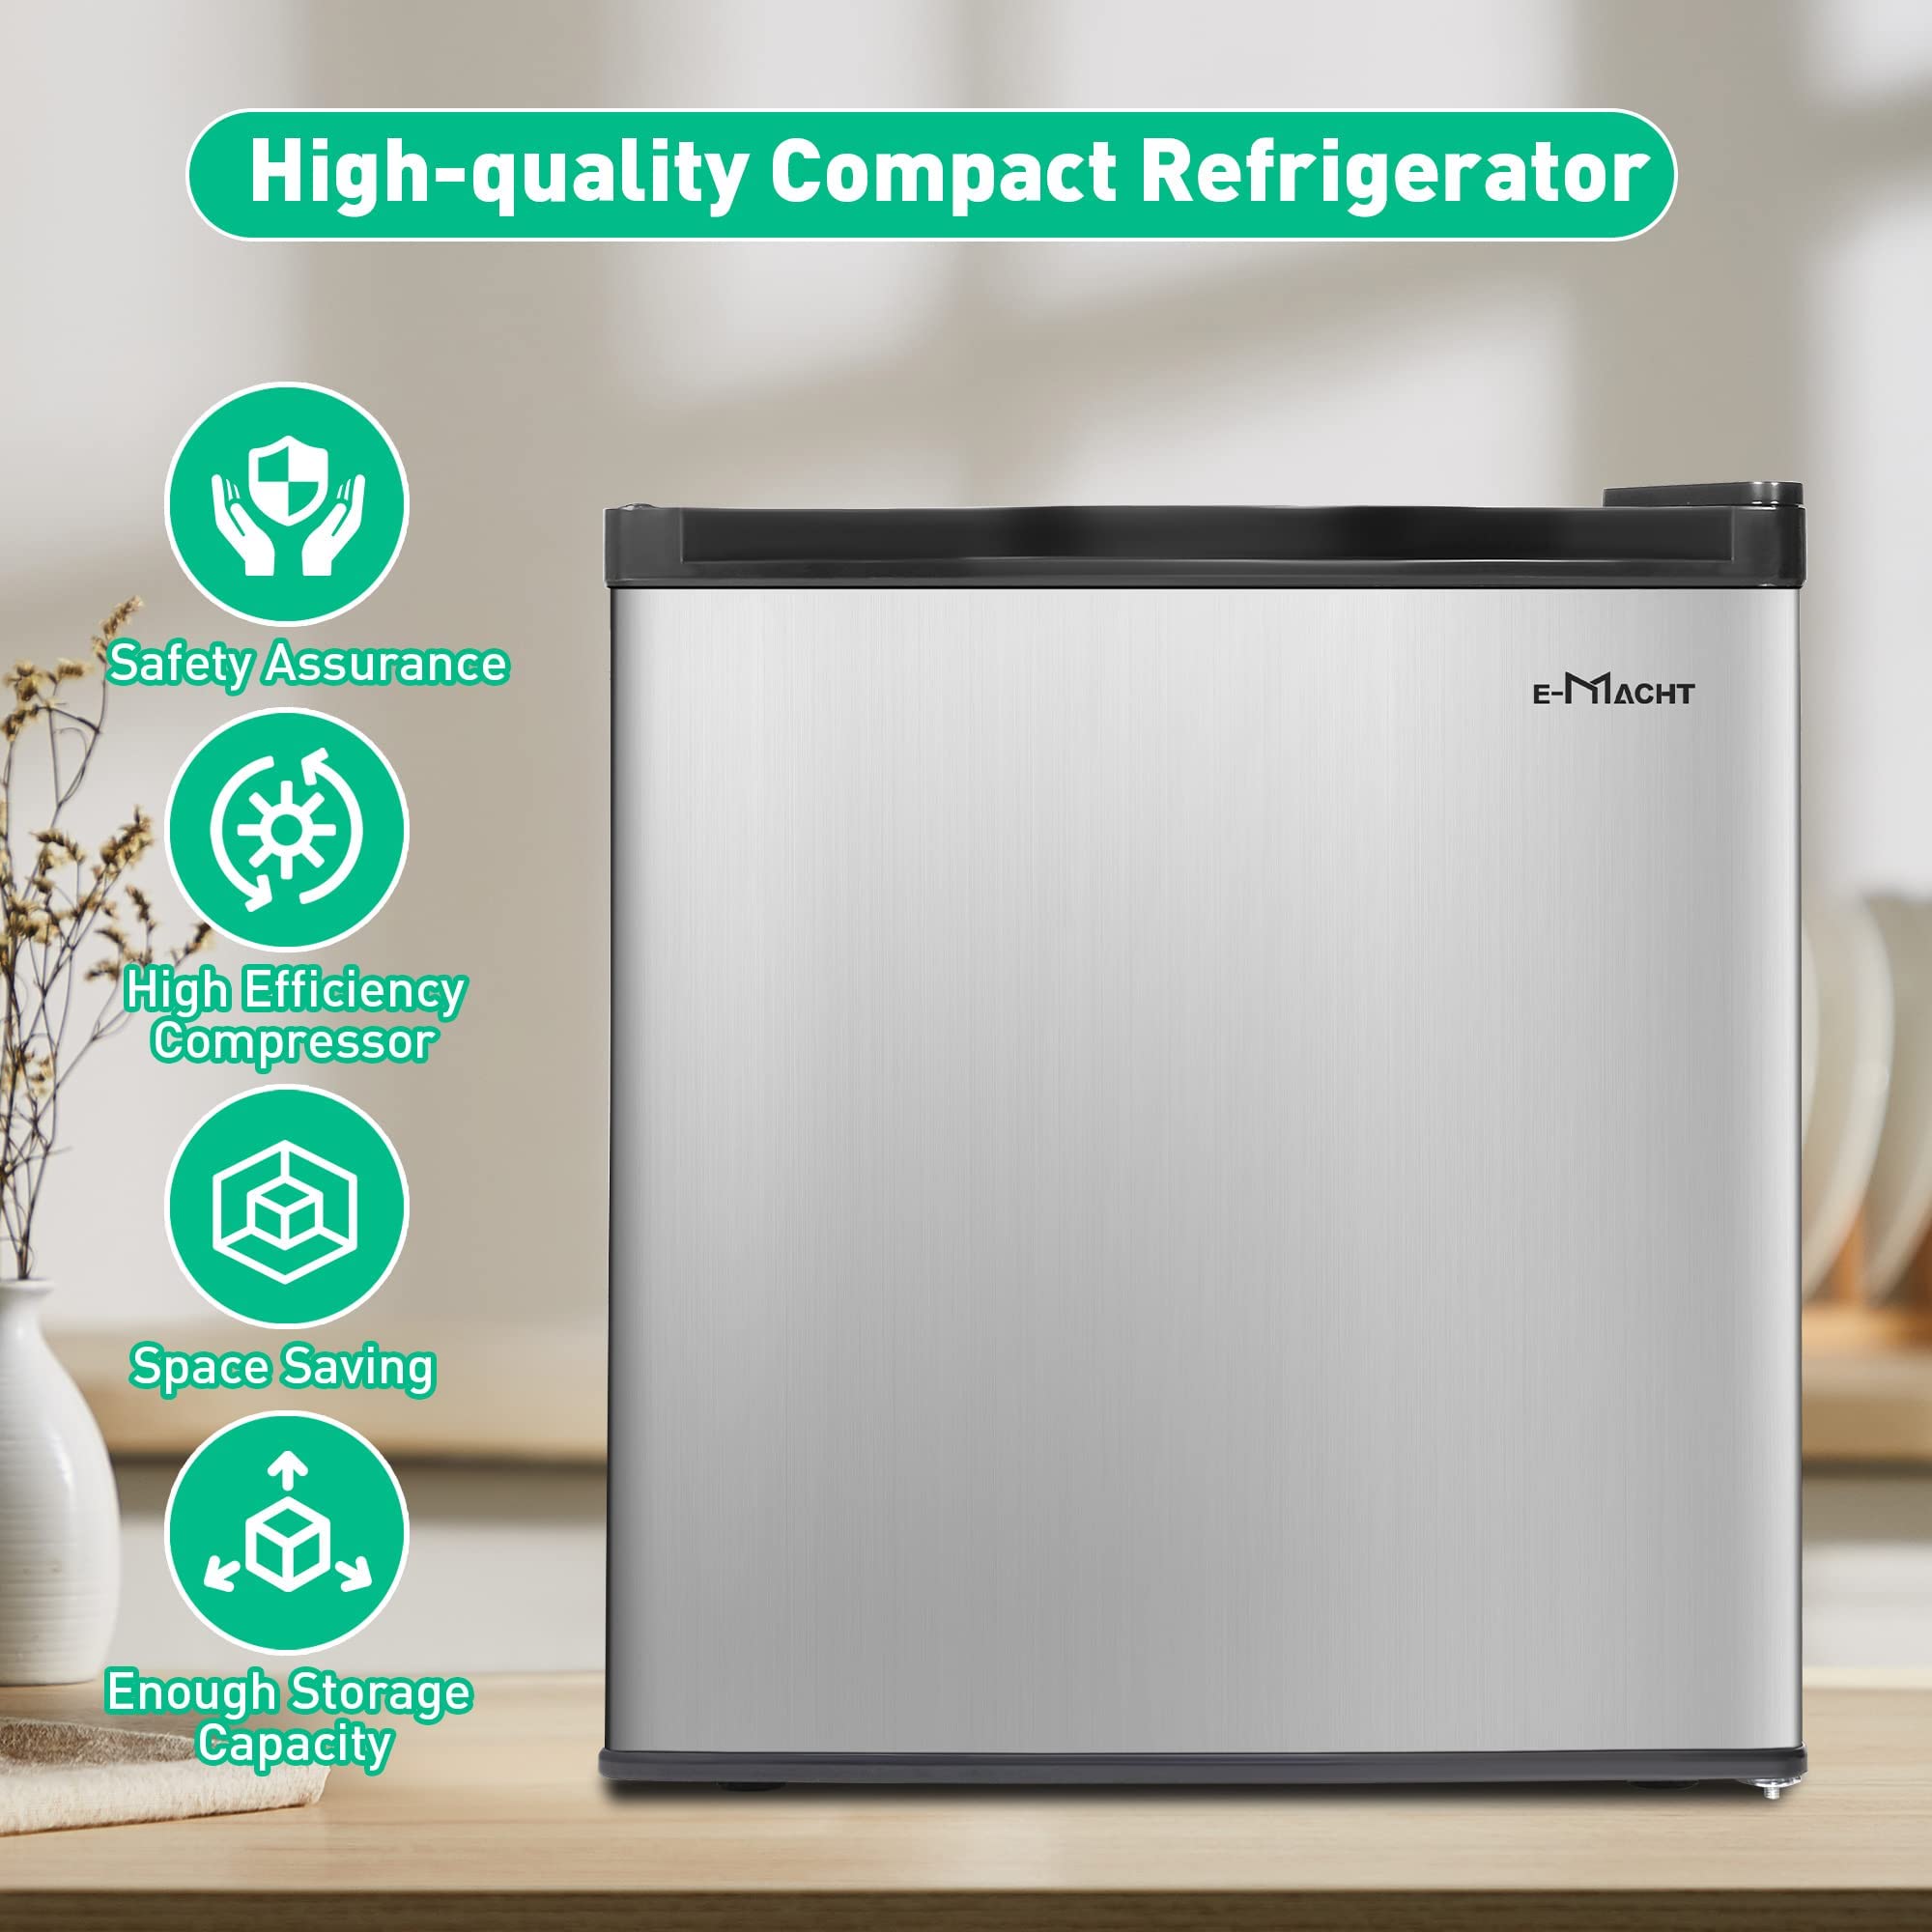 Mini Fridge with Freezer, Single Door Compact Refrigerator with Adjustable Legs, Adjustable Thermostat Control, Removable Shelf, Small Fridge Perfect for Home/Dorm/Office/Apartment, 1.6 Cu.Ft.